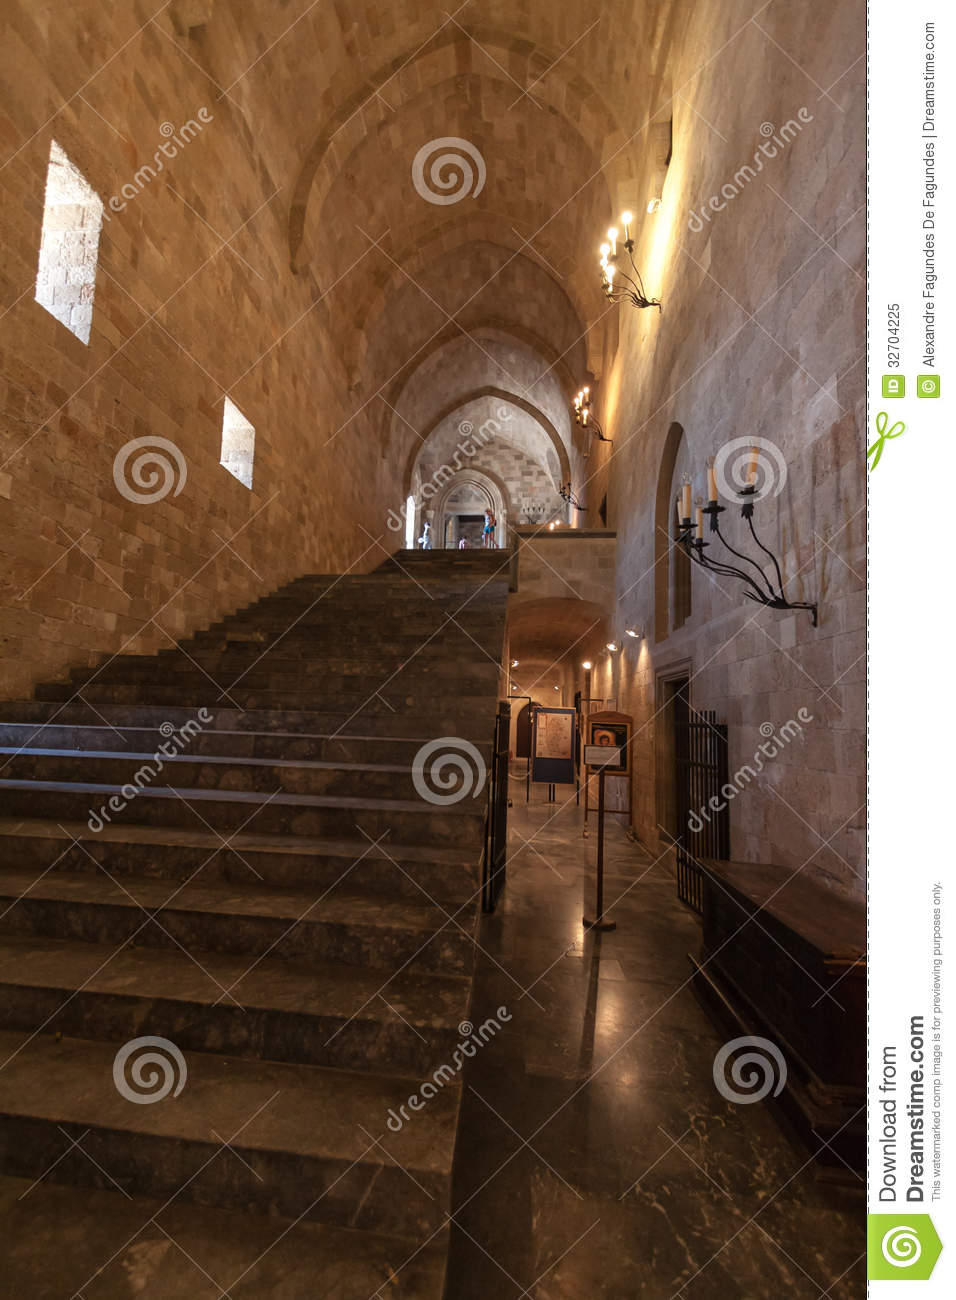     Arch Ceiling Inside The Medieval Castle Of Rhodes Island Greece